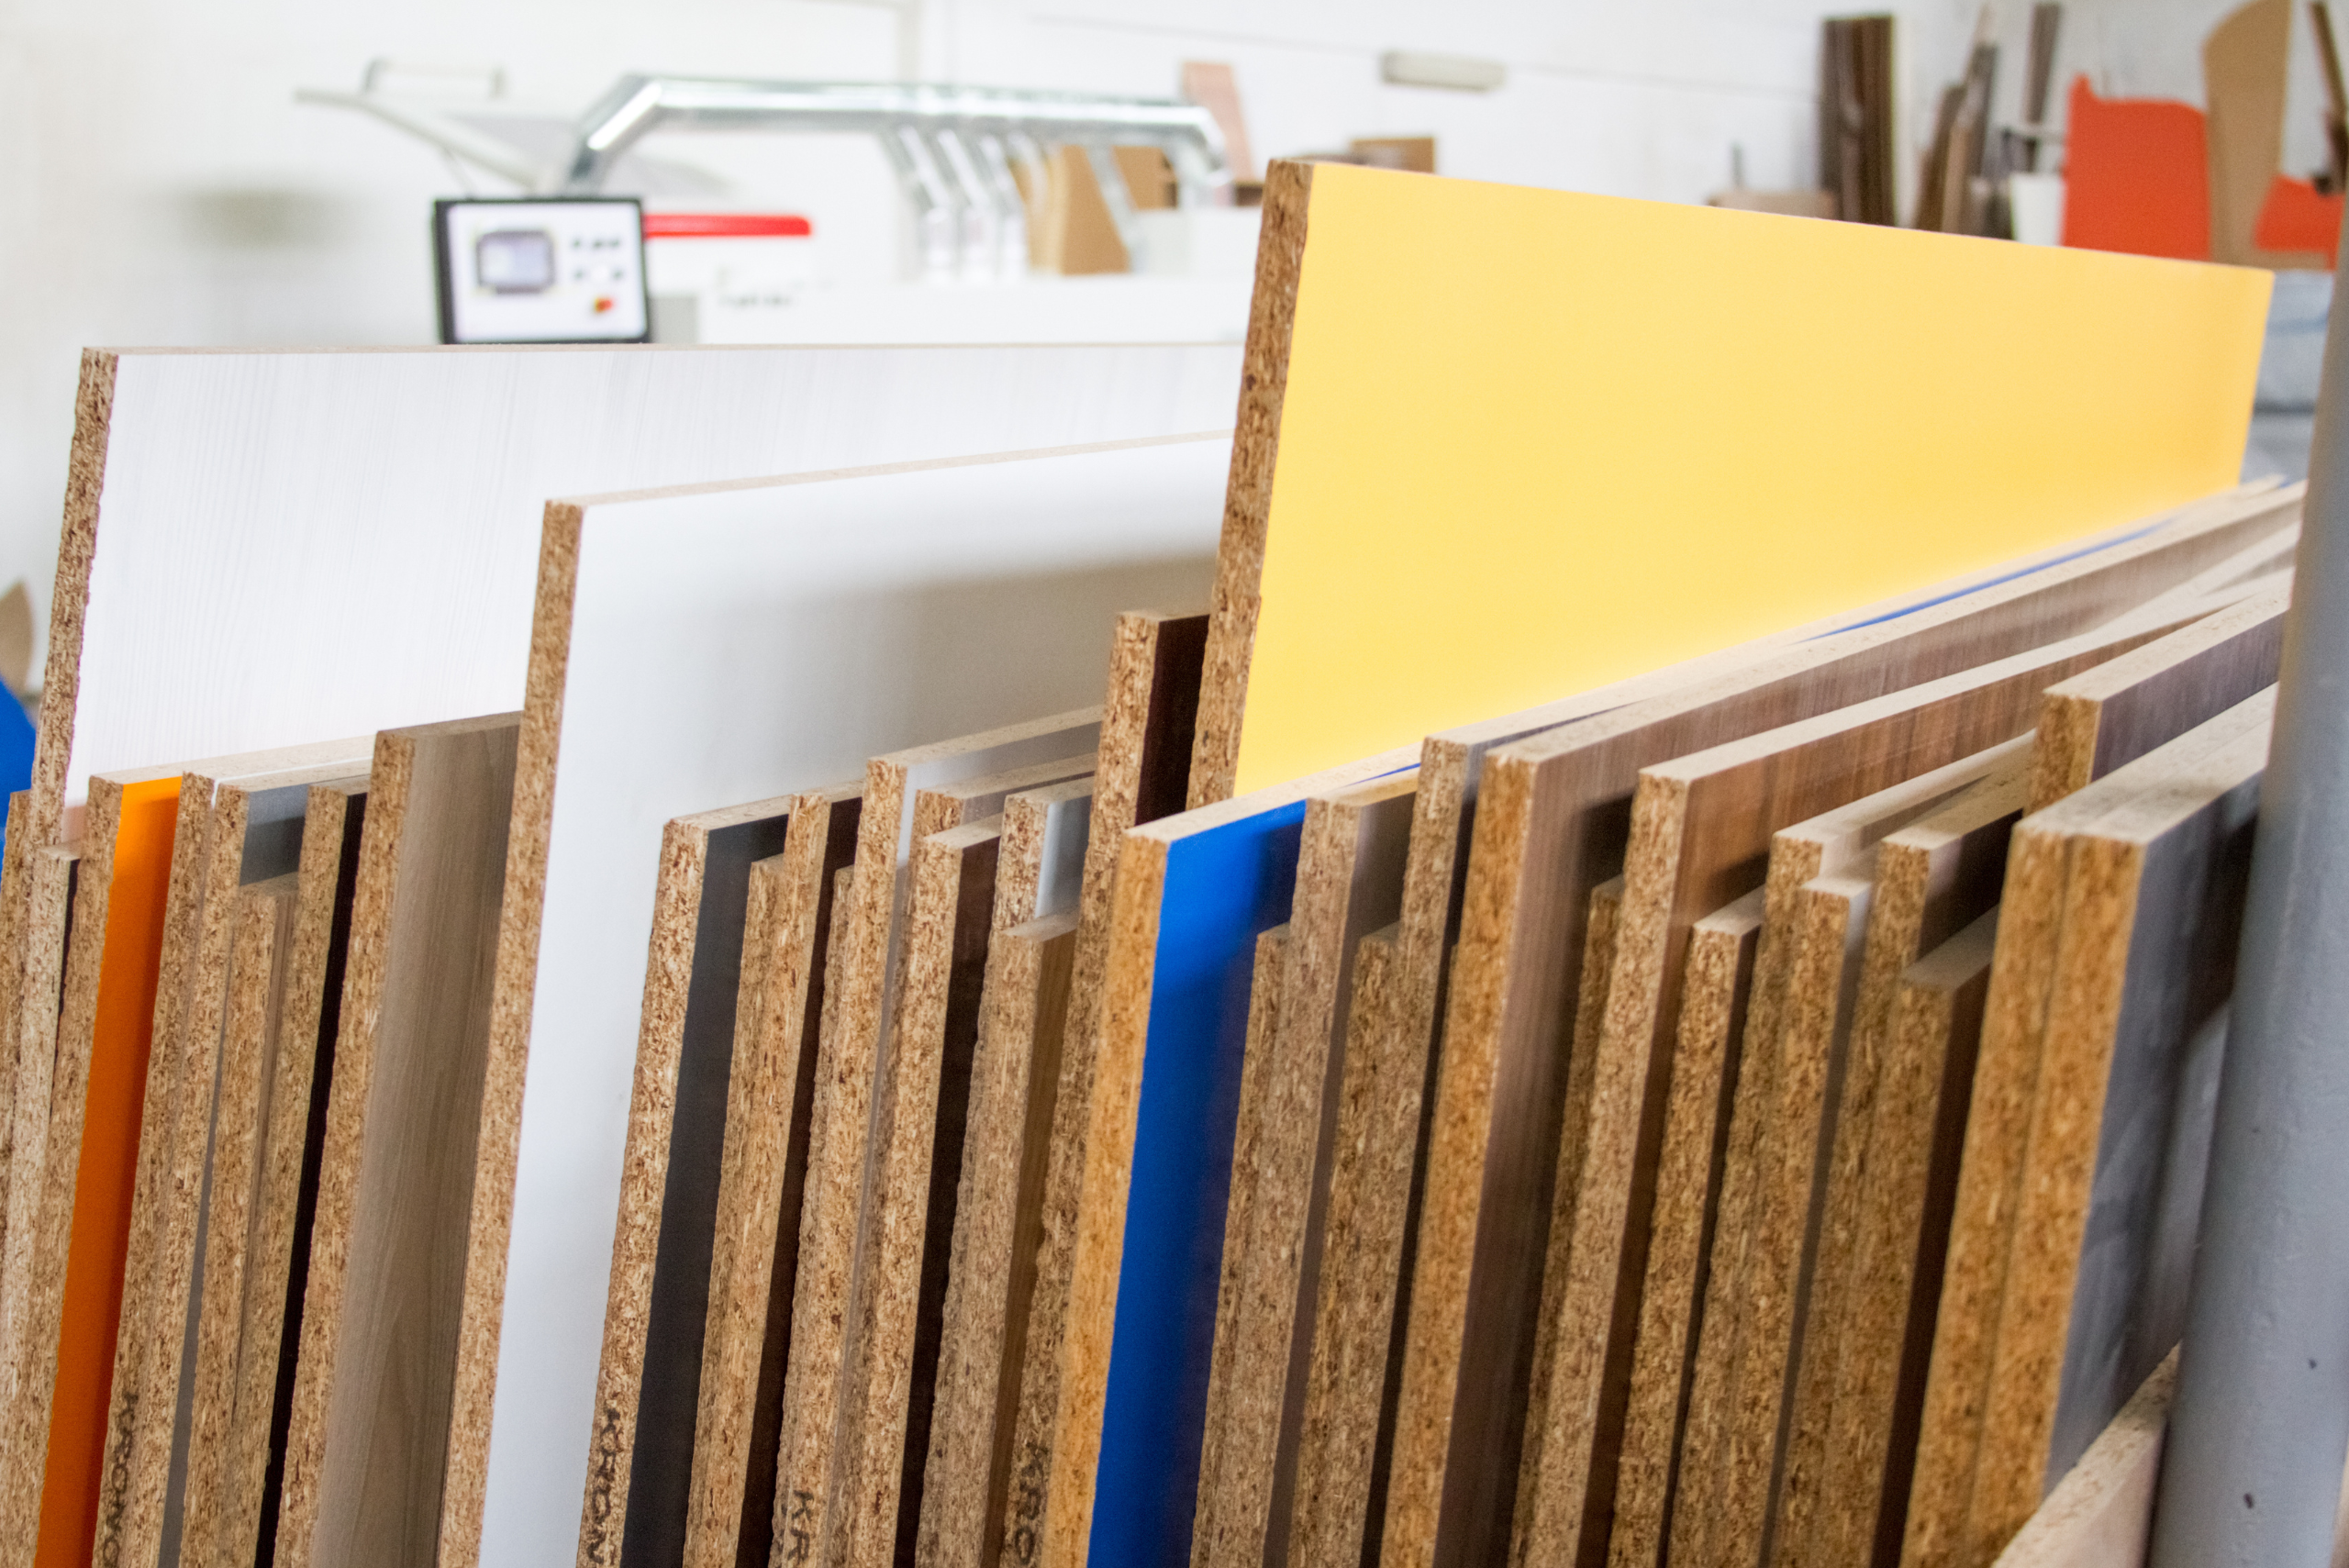 A selection of plywood boards in different colors.